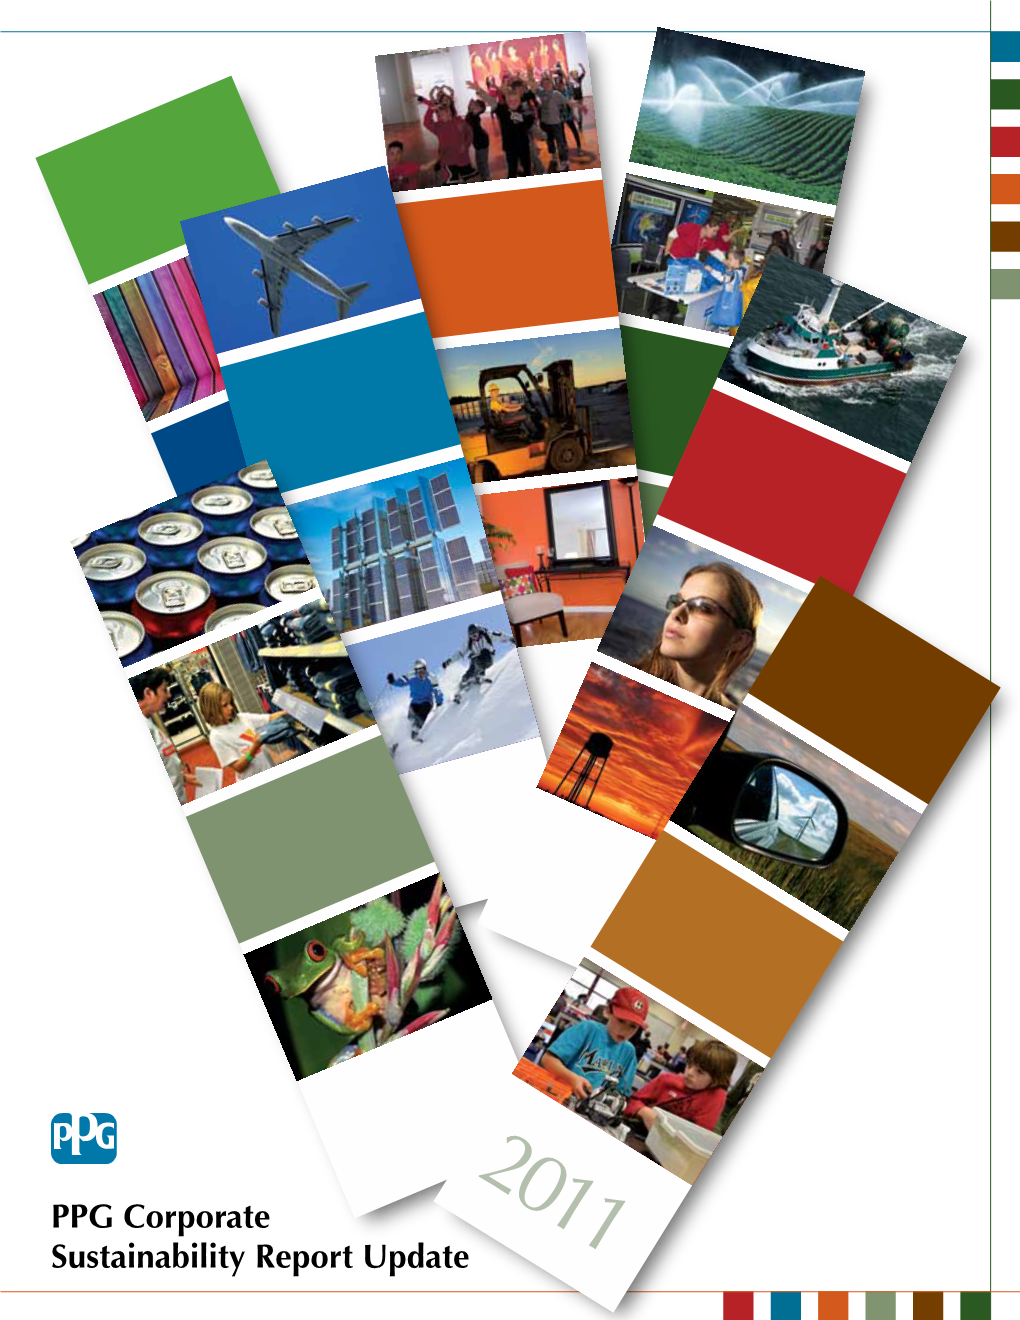 2011 PPG Corporate Sustainability Report Update a Message from the Chairman